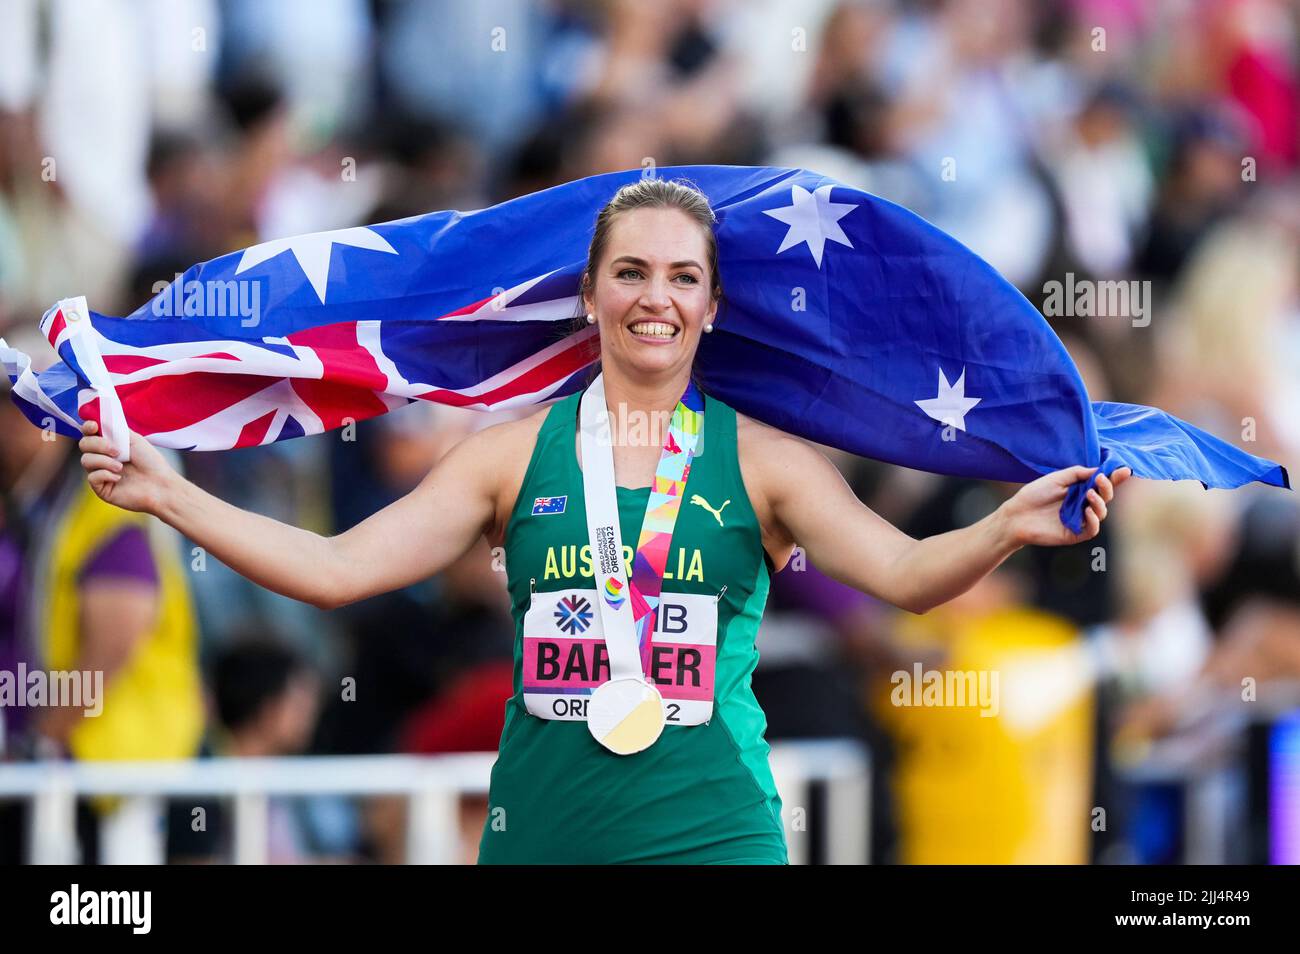 Eugene, USA. 22nd July, 2022. Kelsey-Lee Barber of Australia celebrates after the women's javelin throw final at the World Athletics Championships Oregon22 in Eugene, Oregon, the United States, July 22, 2022. Credit: Wang Ying/Xinhua/Alamy Live News Stock Photo